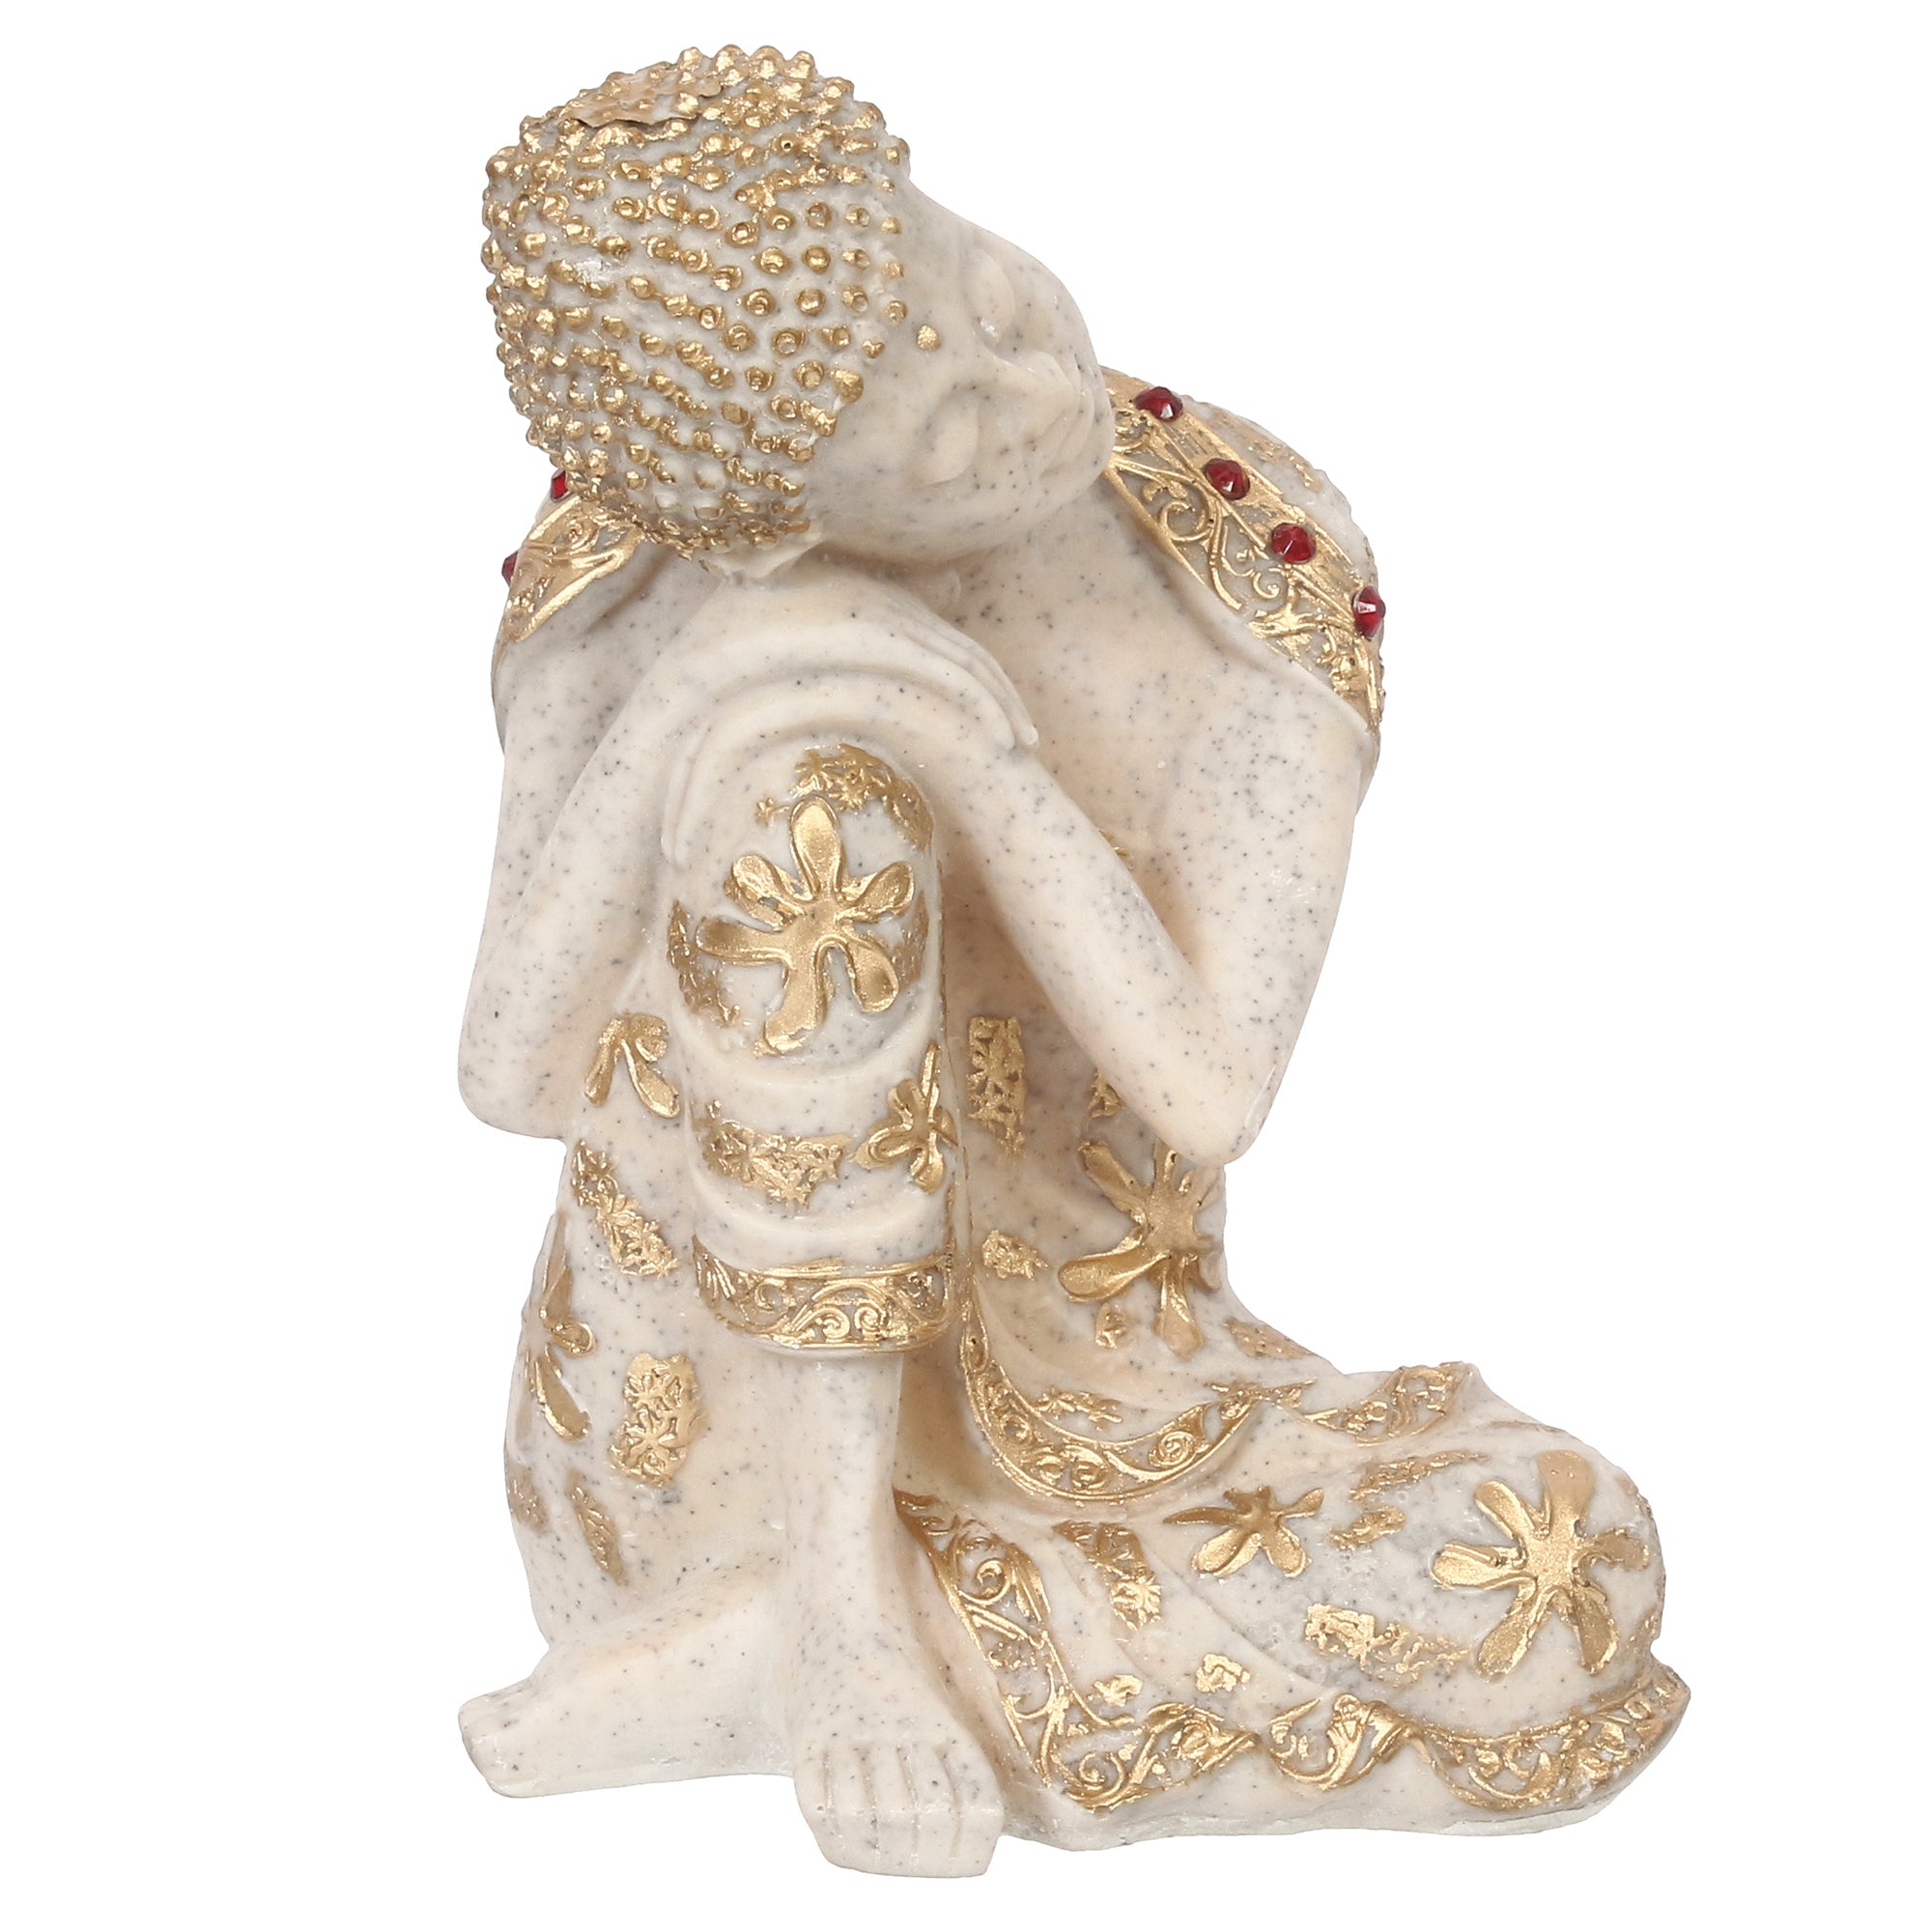 Polyresin White and Golden Resting Buddha on Knee Statue 3